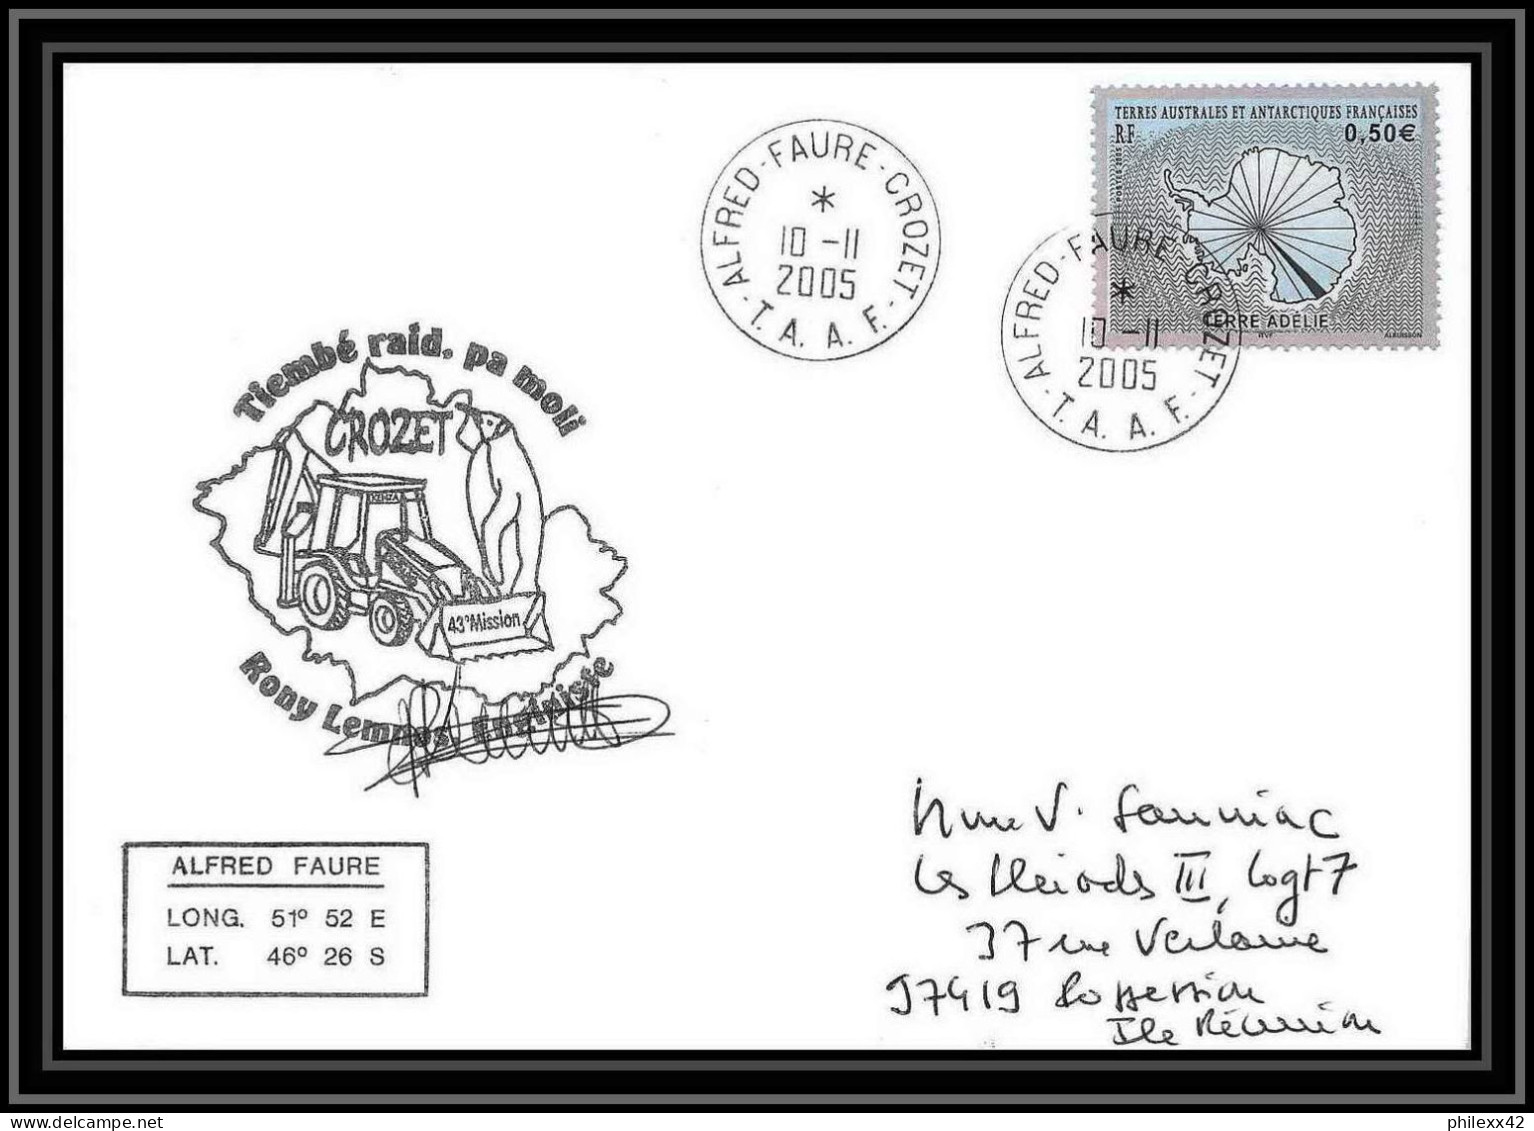 2528 ANTARCTIC Terres Australes TAAF Lettre Cover Dufresne 2 43 ème Mission 10/11/2005 N°434 Signé Signed - Covers & Documents